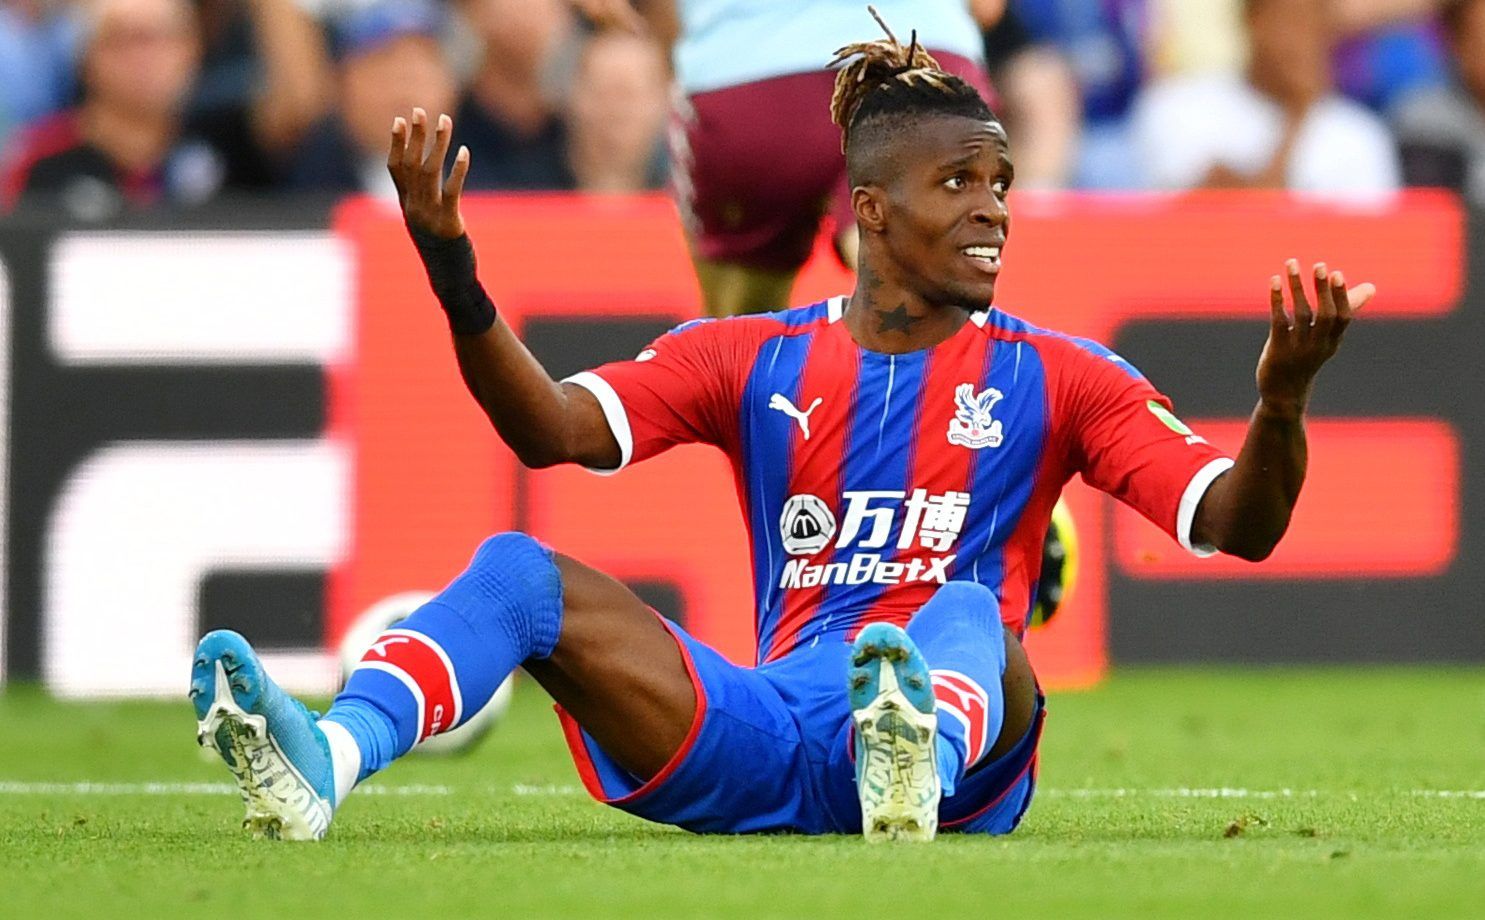 Soccer Football - Premier League - Crystal Palace v Aston Villa - Selhurst Park, London, Britain - August 31, 2019  Crystal Palace's Wilfried Zaha reacts              REUTERS/Dylan Martinez  EDITORIAL USE ONLY. No use with unauthorized audio, video, data, fixture lists, club/league logos or 